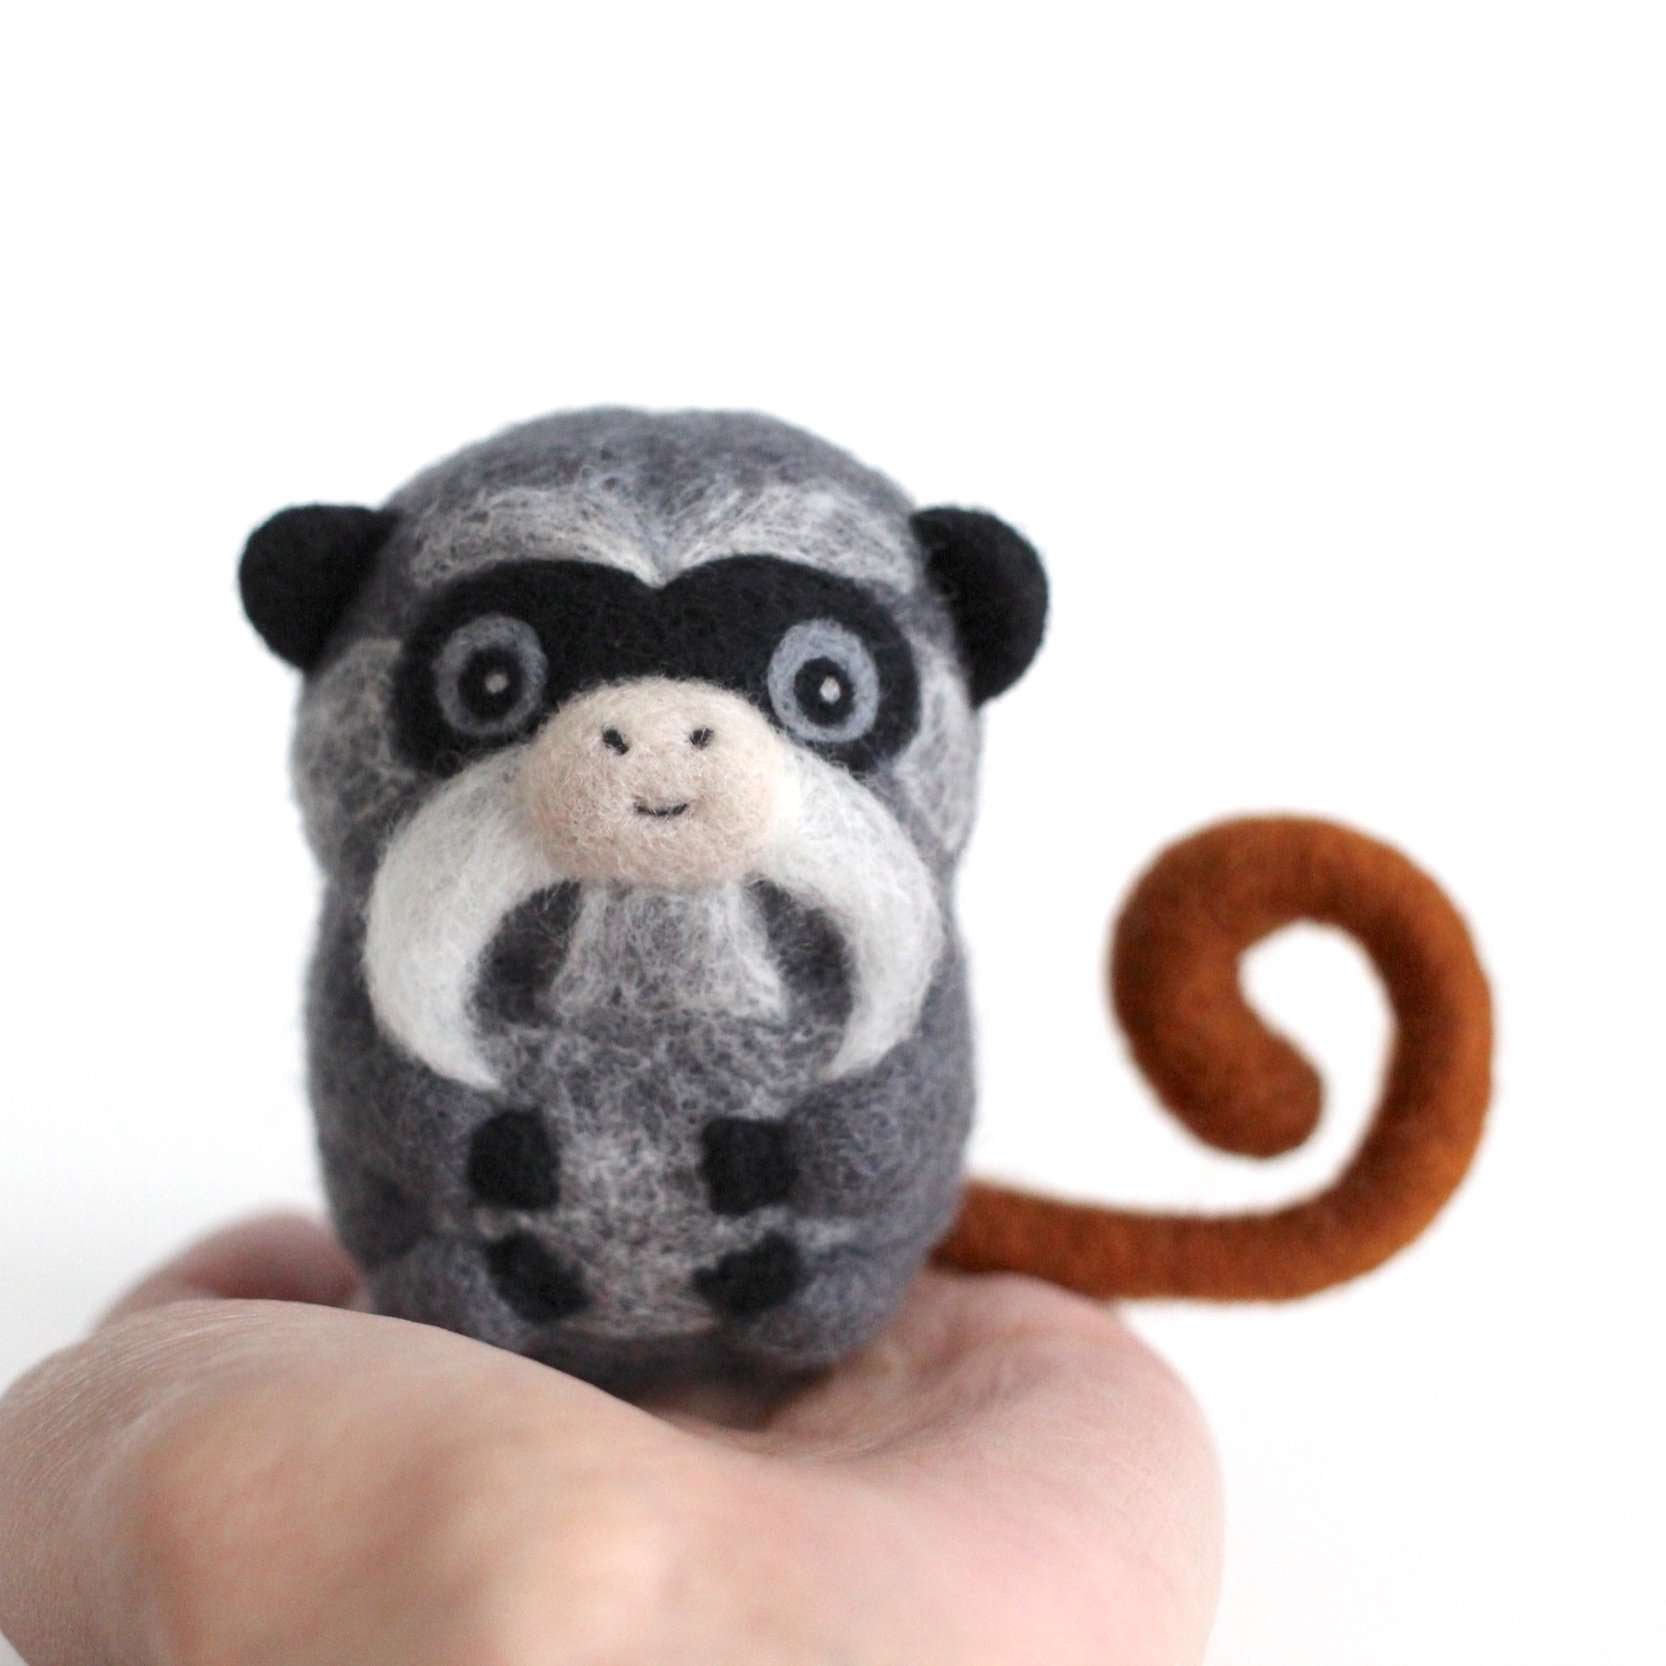 Needle Felted Emperor Tamarin by Wild Whimsy Woolies